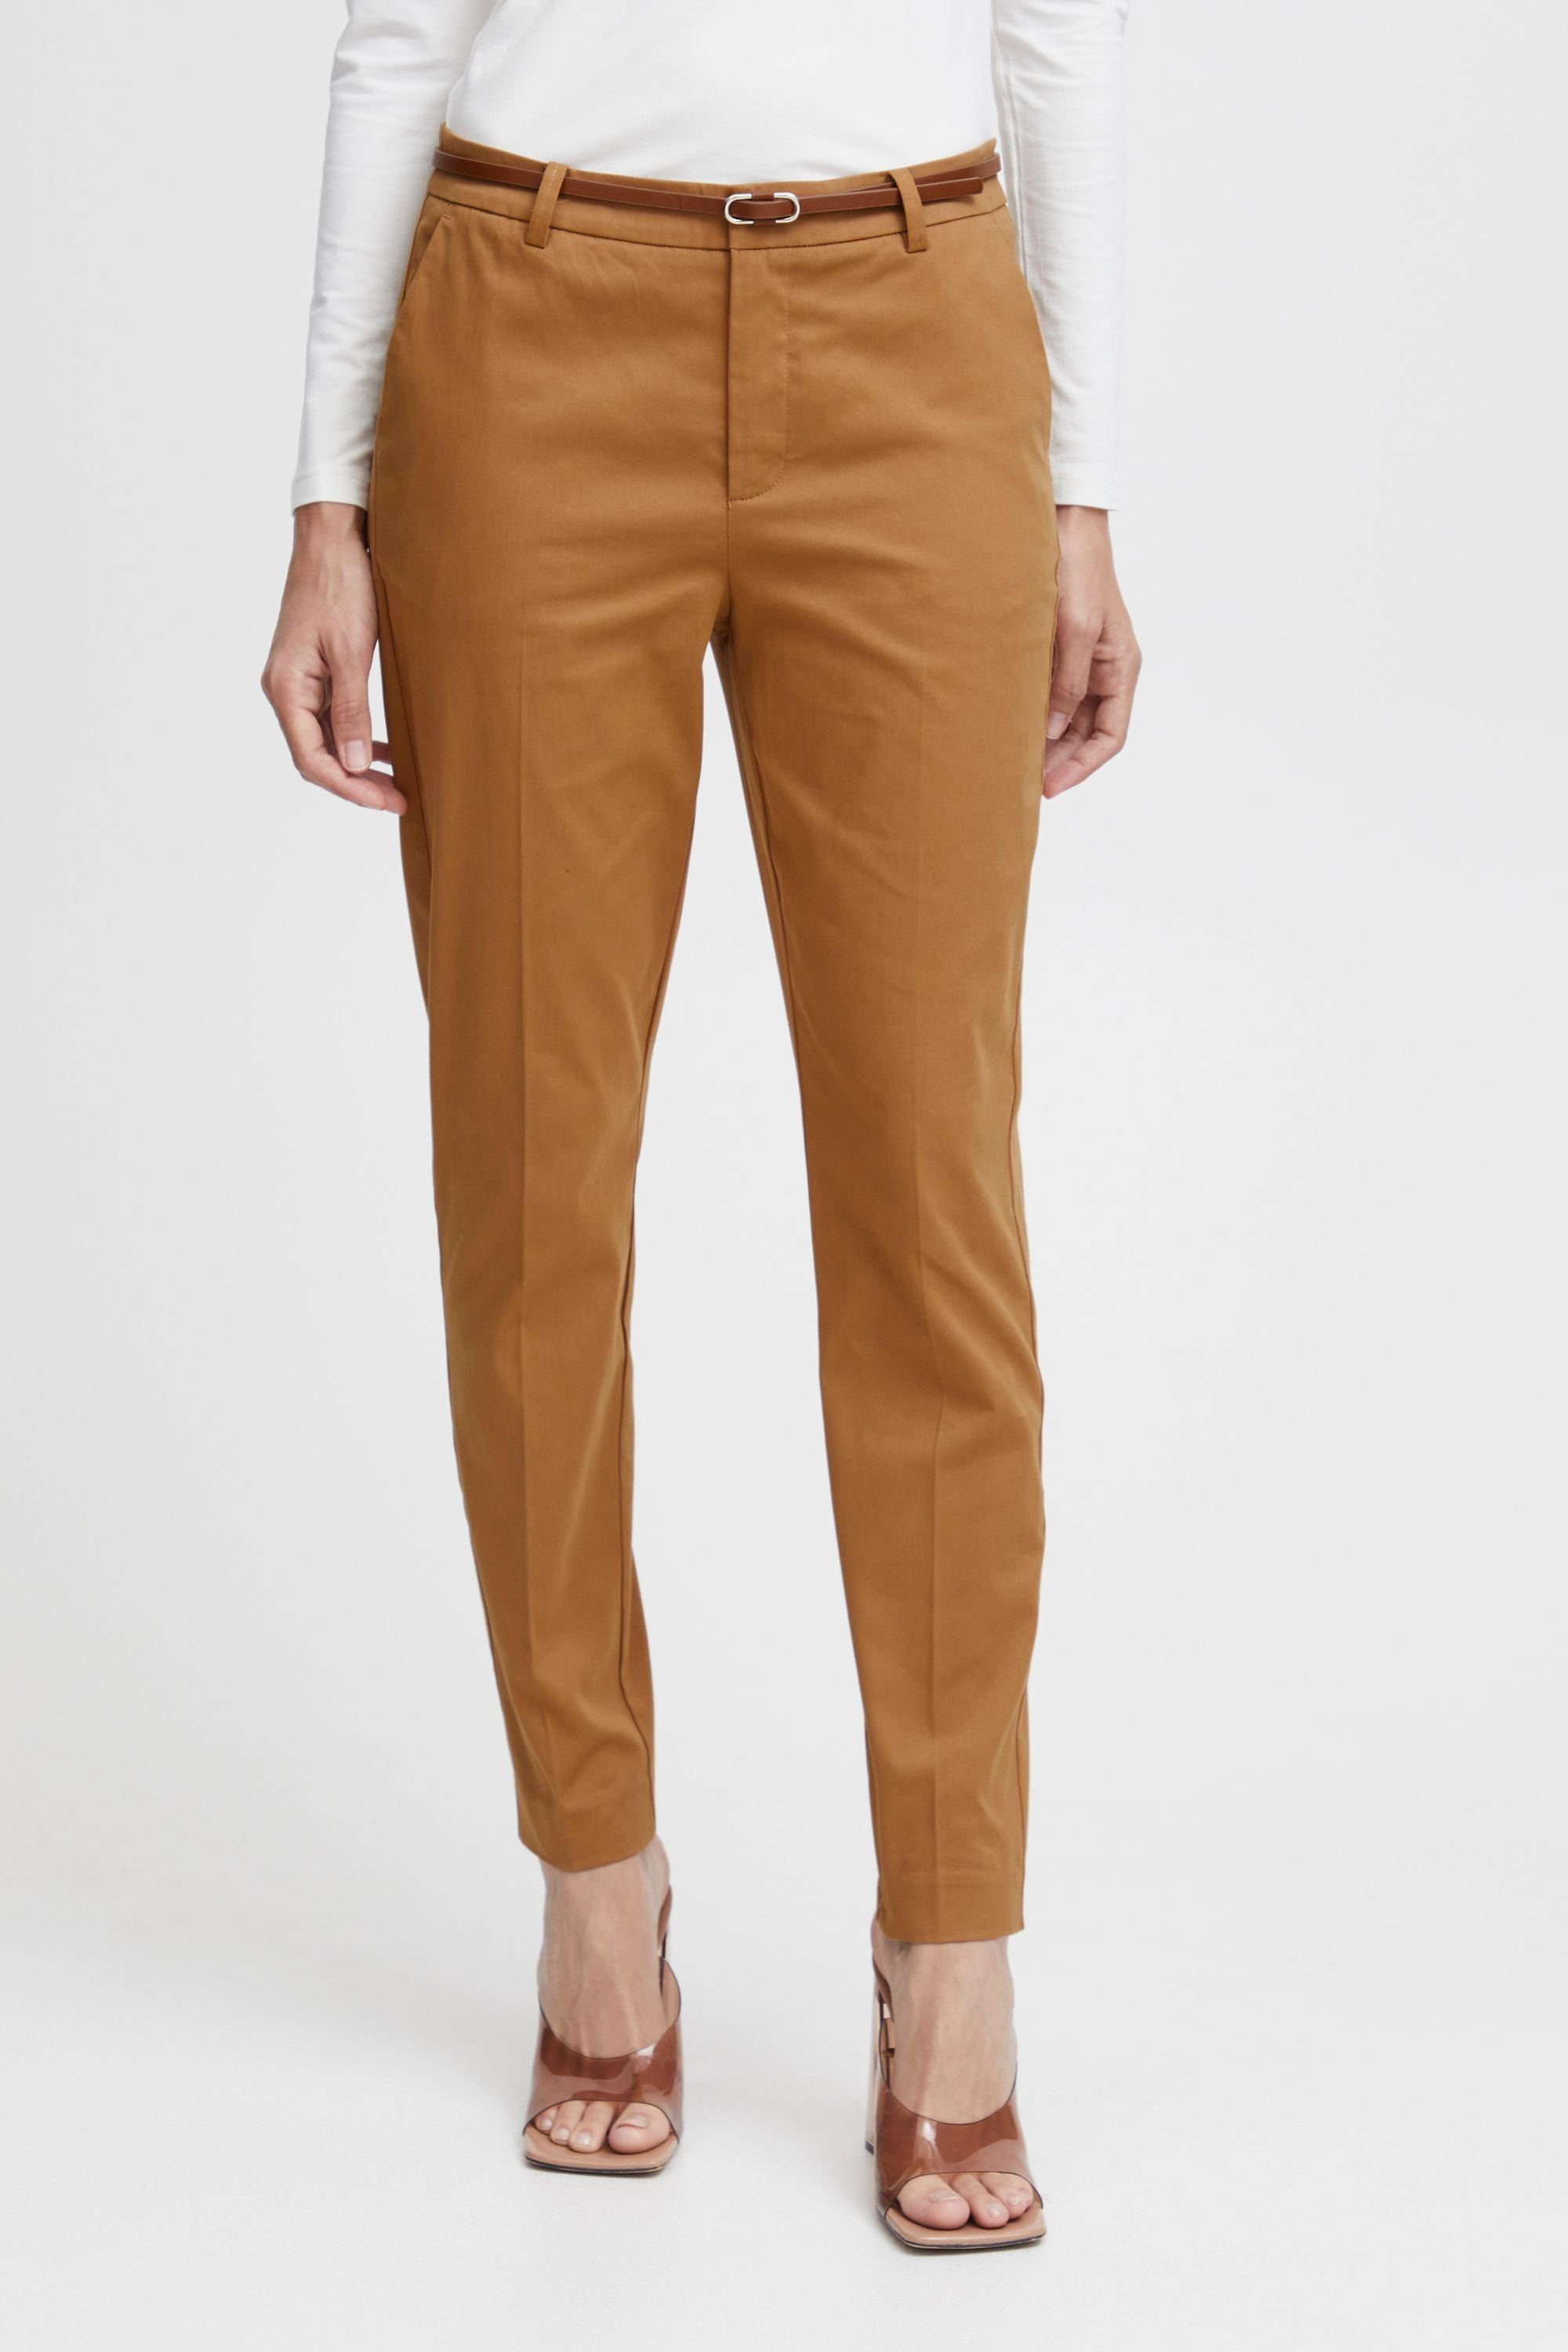 b.young Chinohose BYDays cigaret pants 2 - 20803473 Lange Hose im coolen Chinostyle Toasted Coconut (181029)